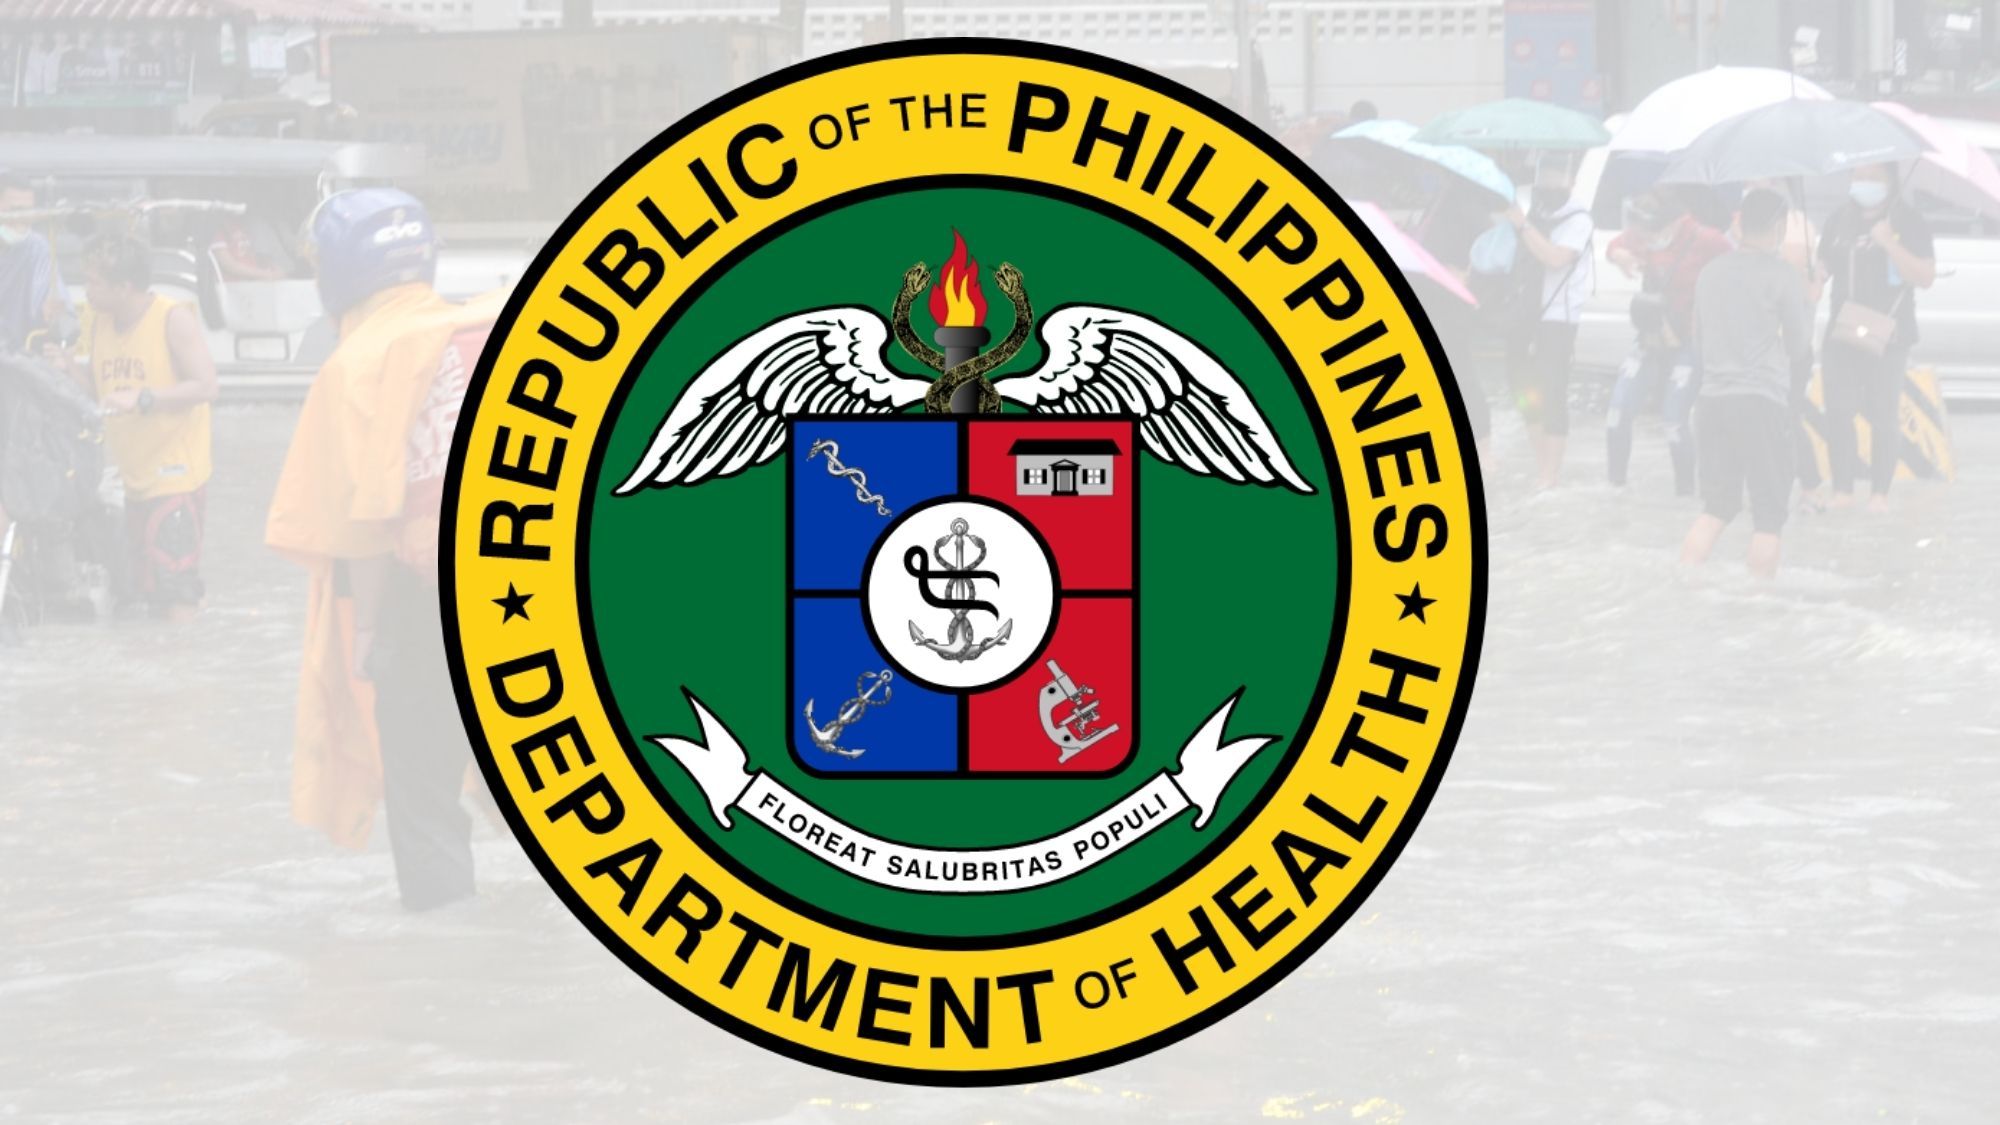 Another scourge DOH warns of increasing leptospirosis cases edited photo by Opinyon